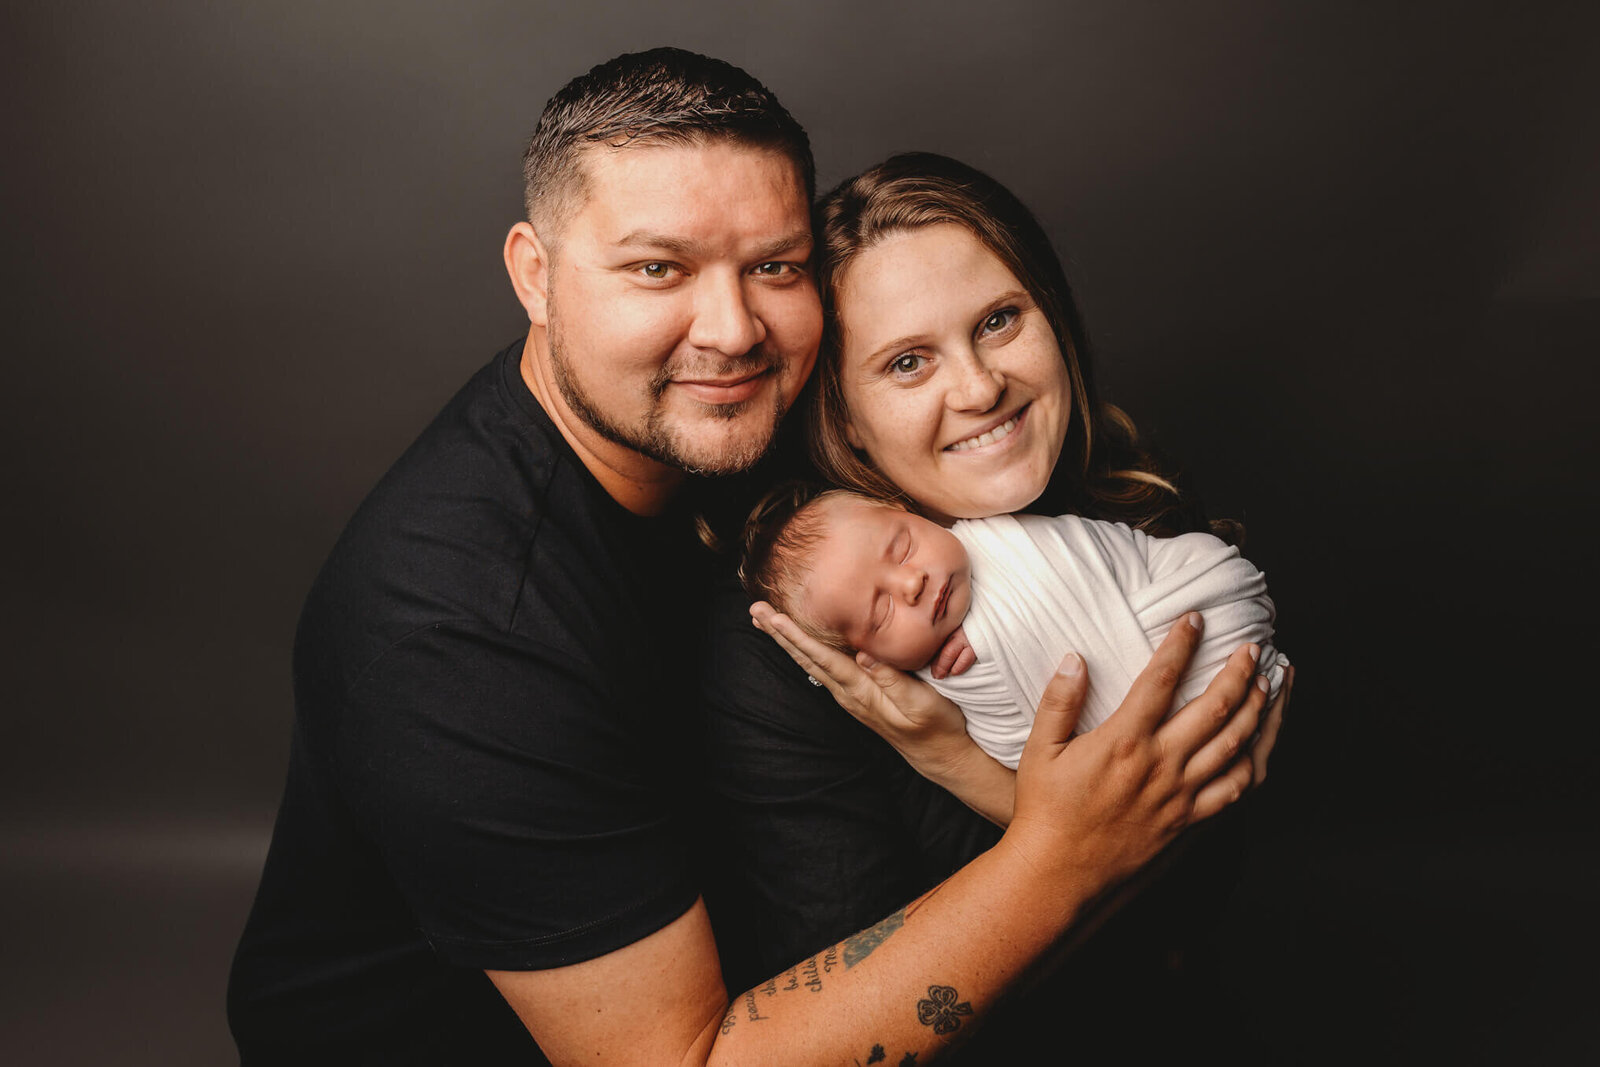 Mom and dad smiling and holding swaddled newborn baby in studio newborn session